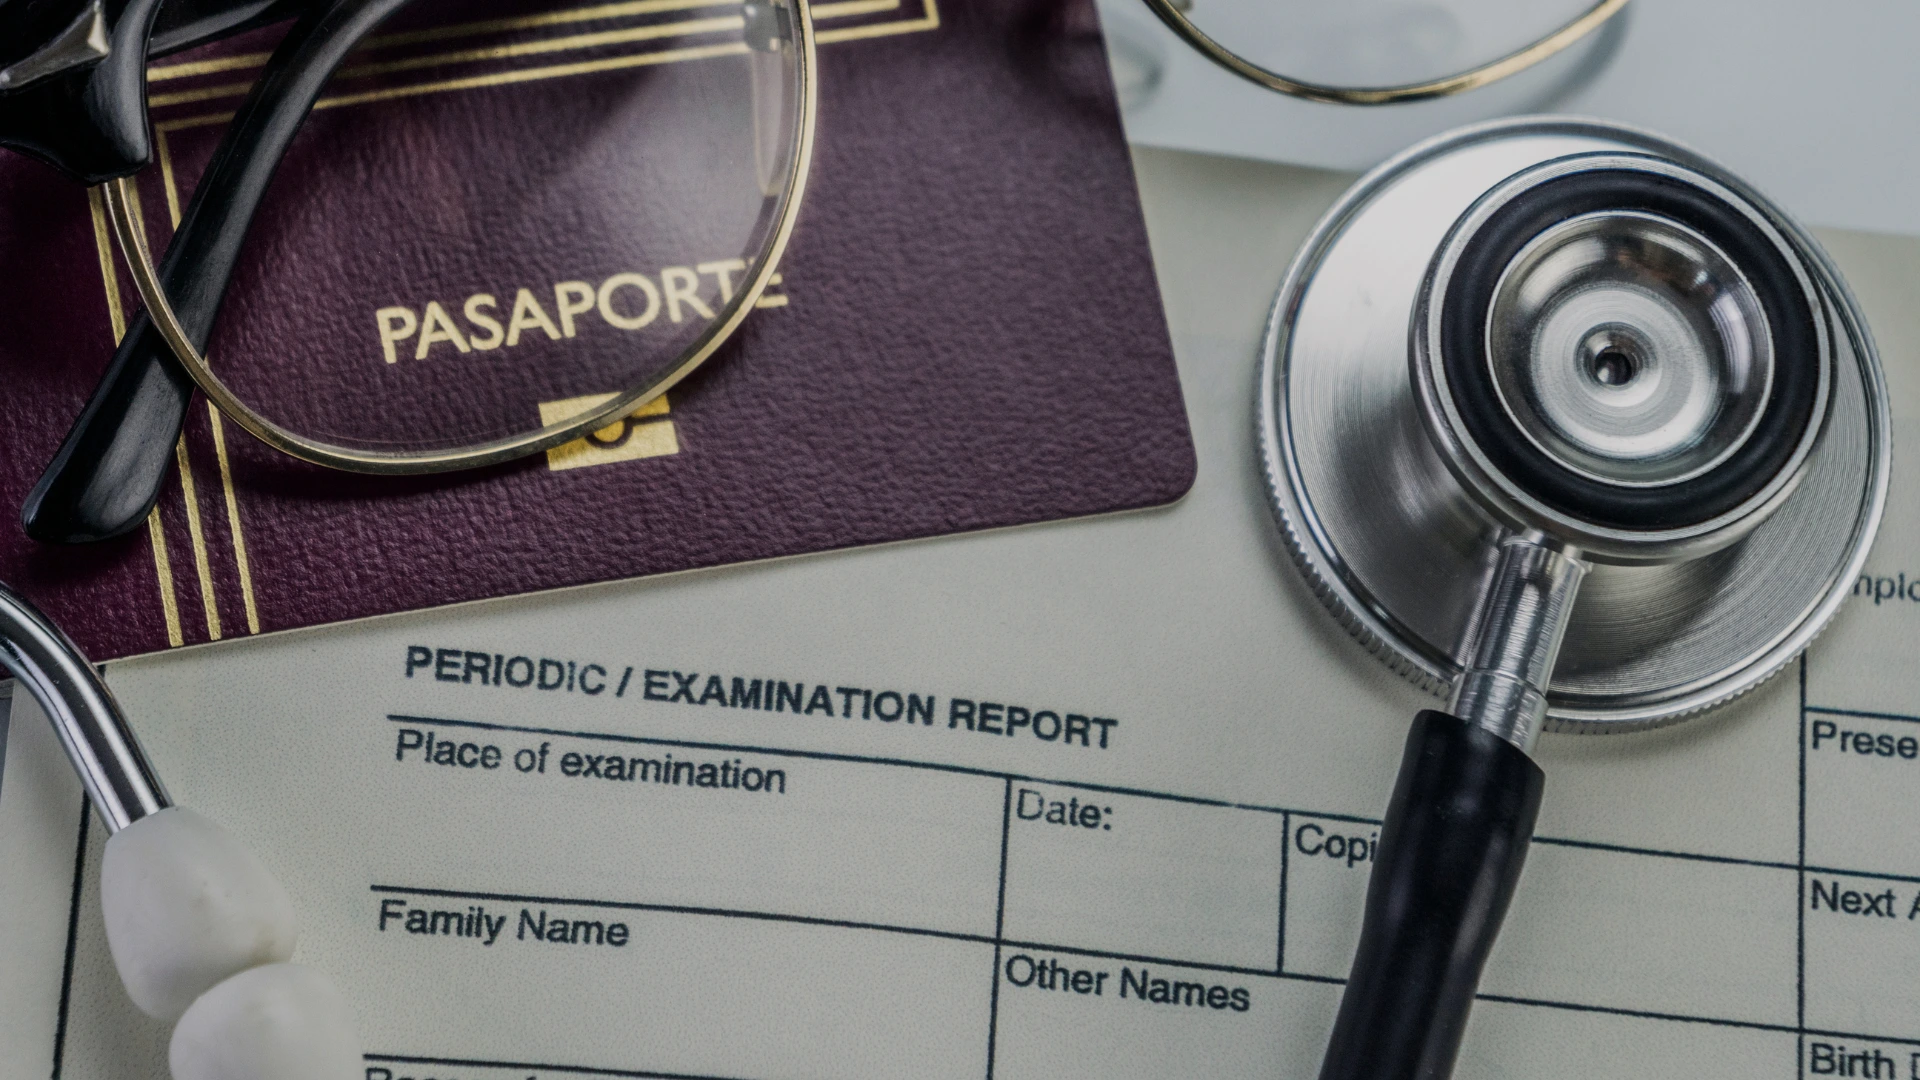 image showing passport and stethoscope